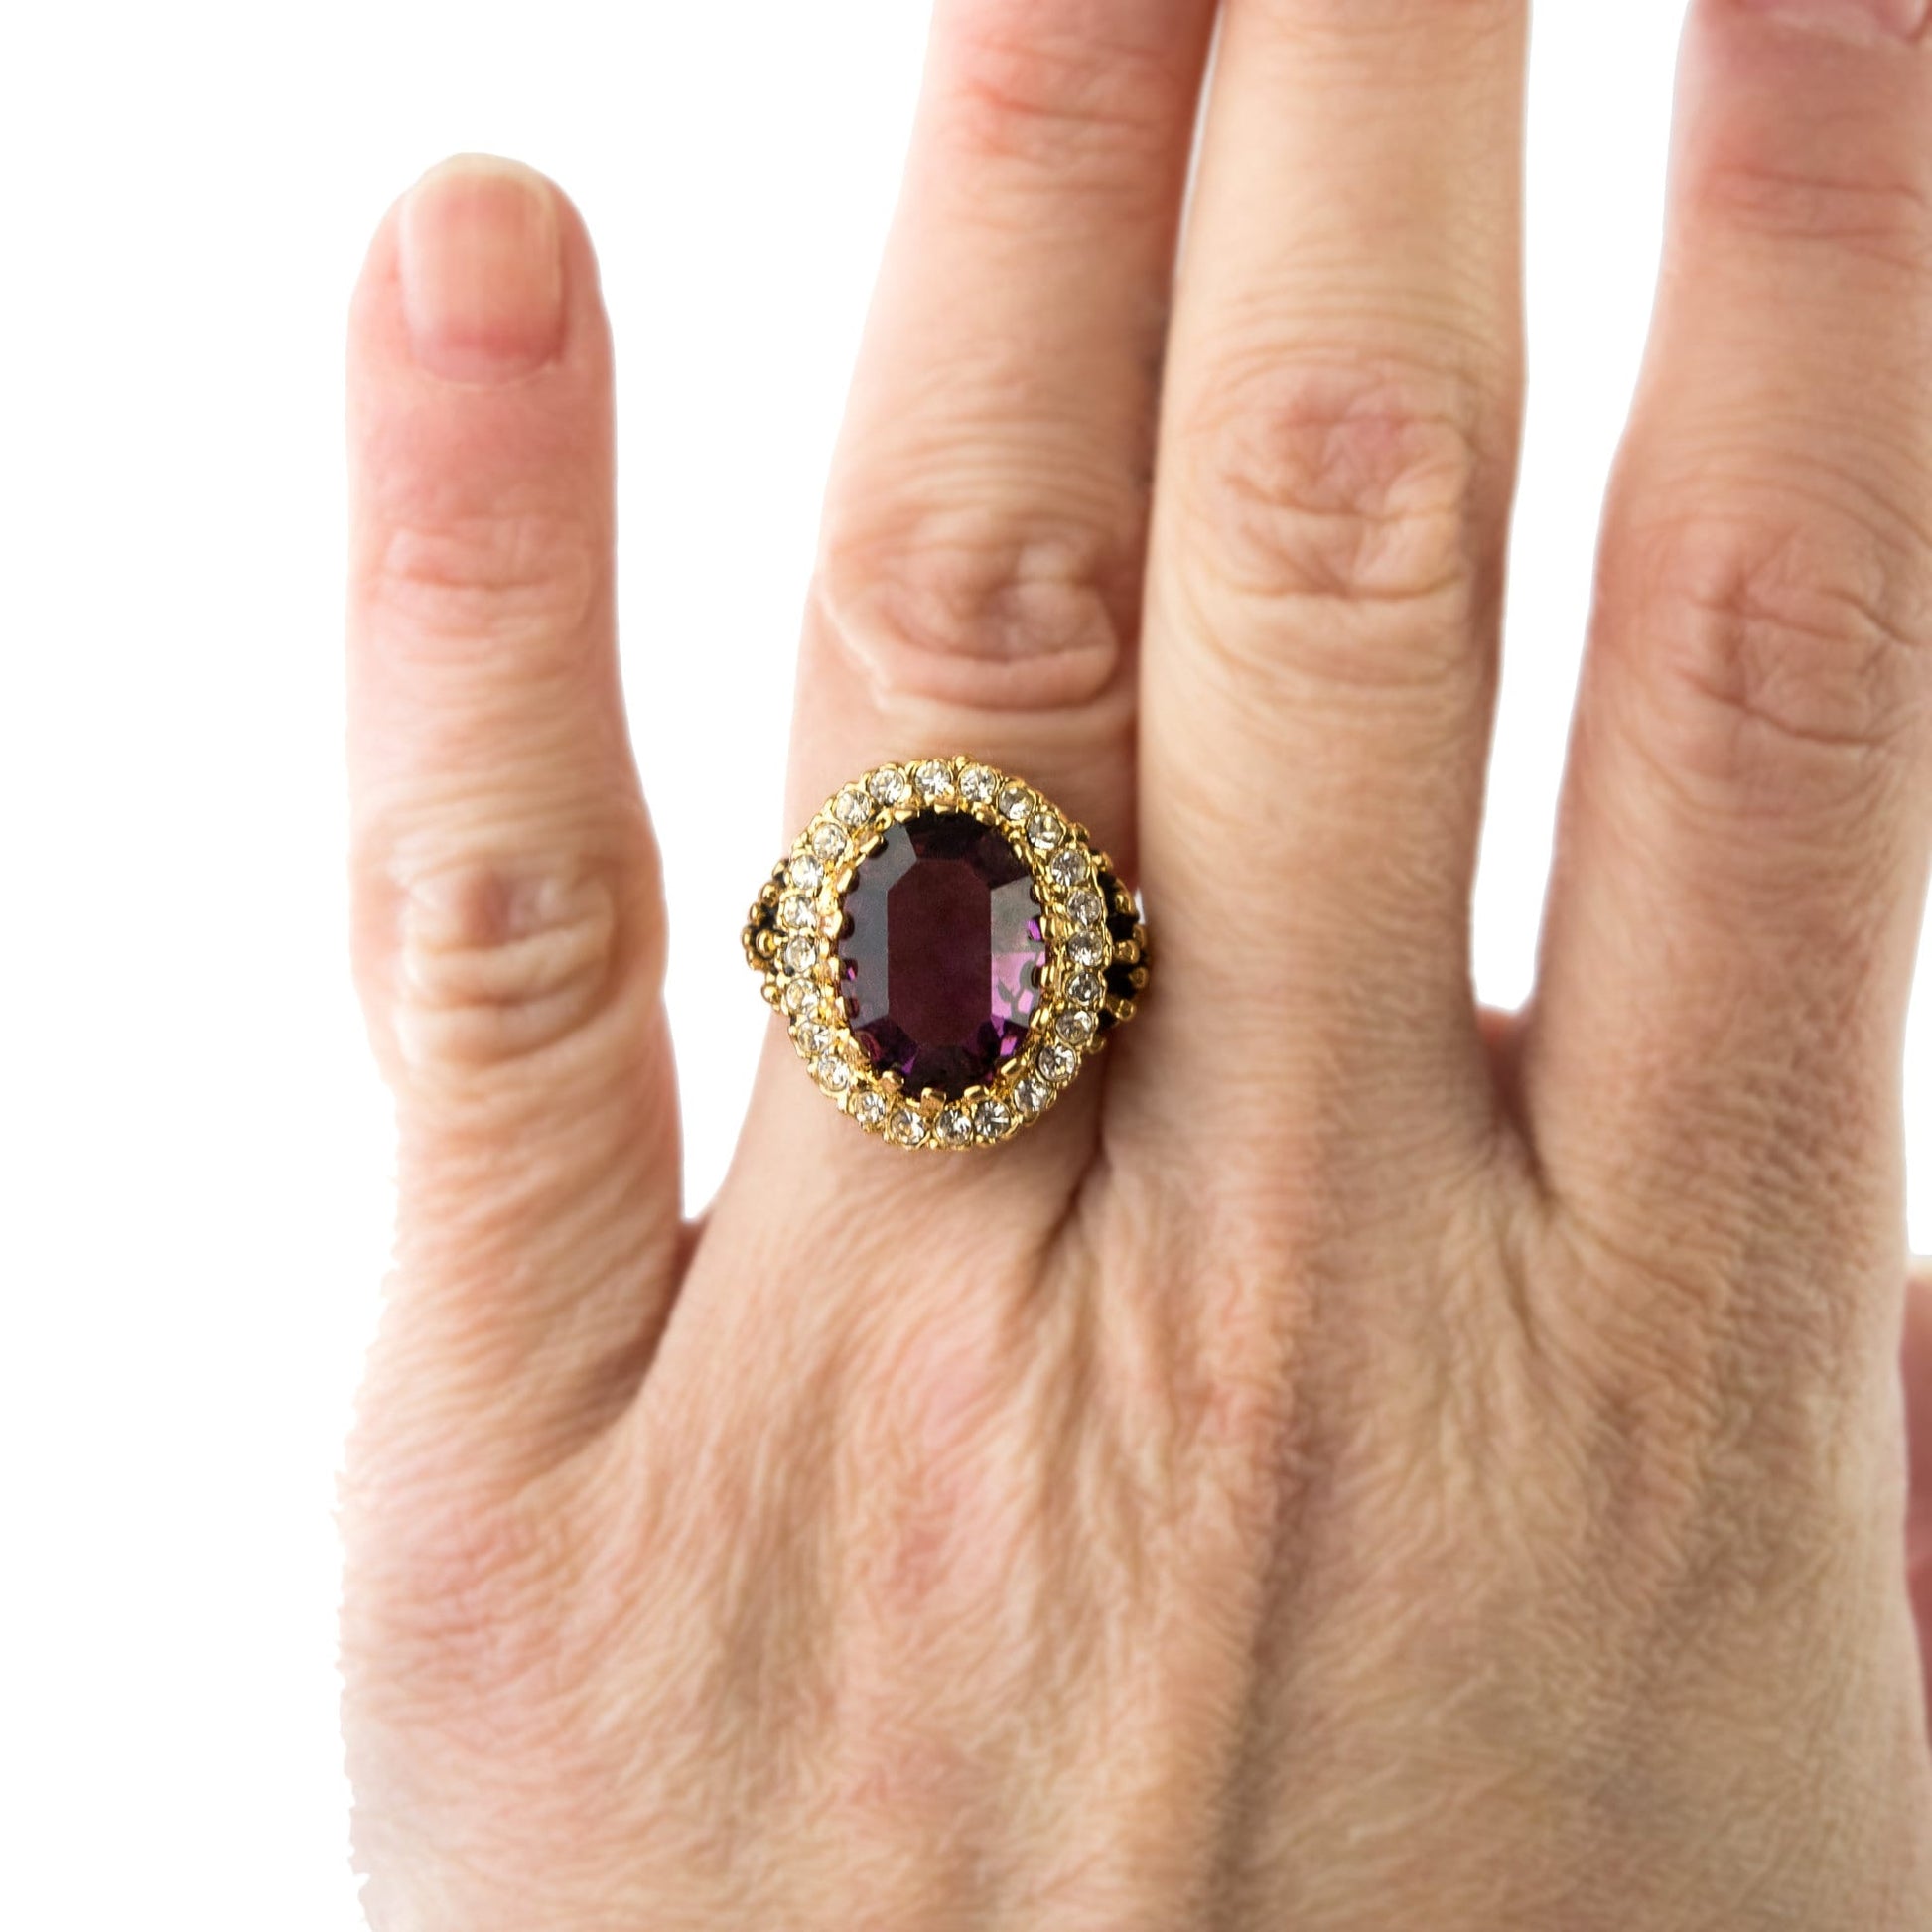 Vintage Ring Amethyst and Clear Crystal 18k Antique Gold Ring Made in the USA #R169 - Limited Stock - Never Worn